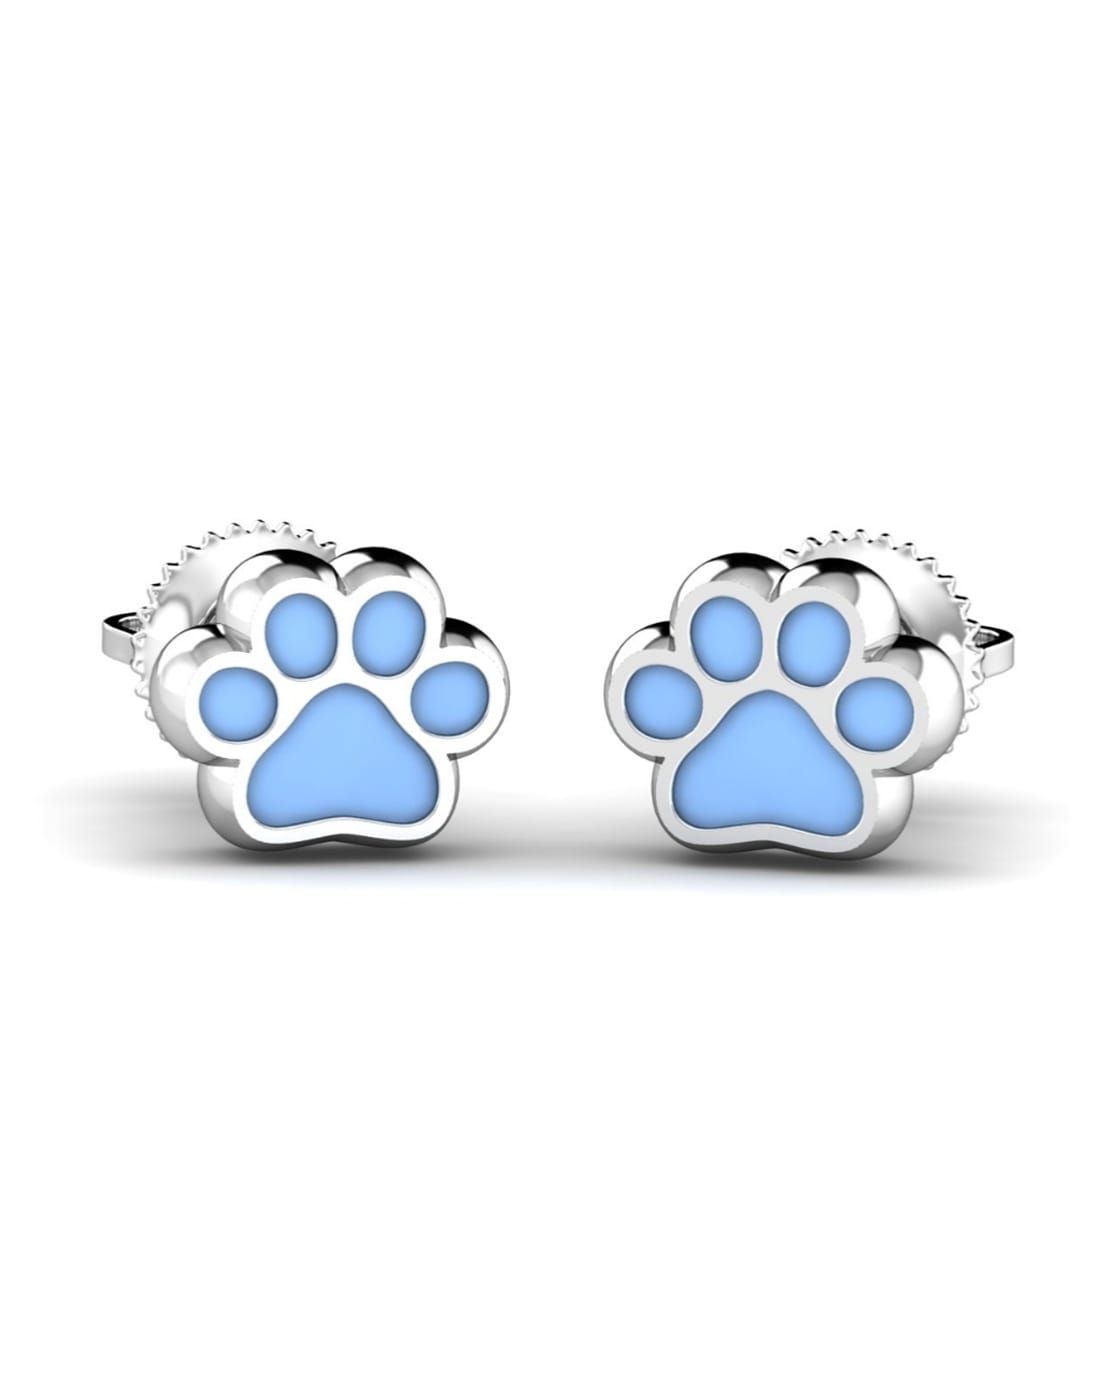 Dog Stud Earrings Sterling Silver Handcrafted